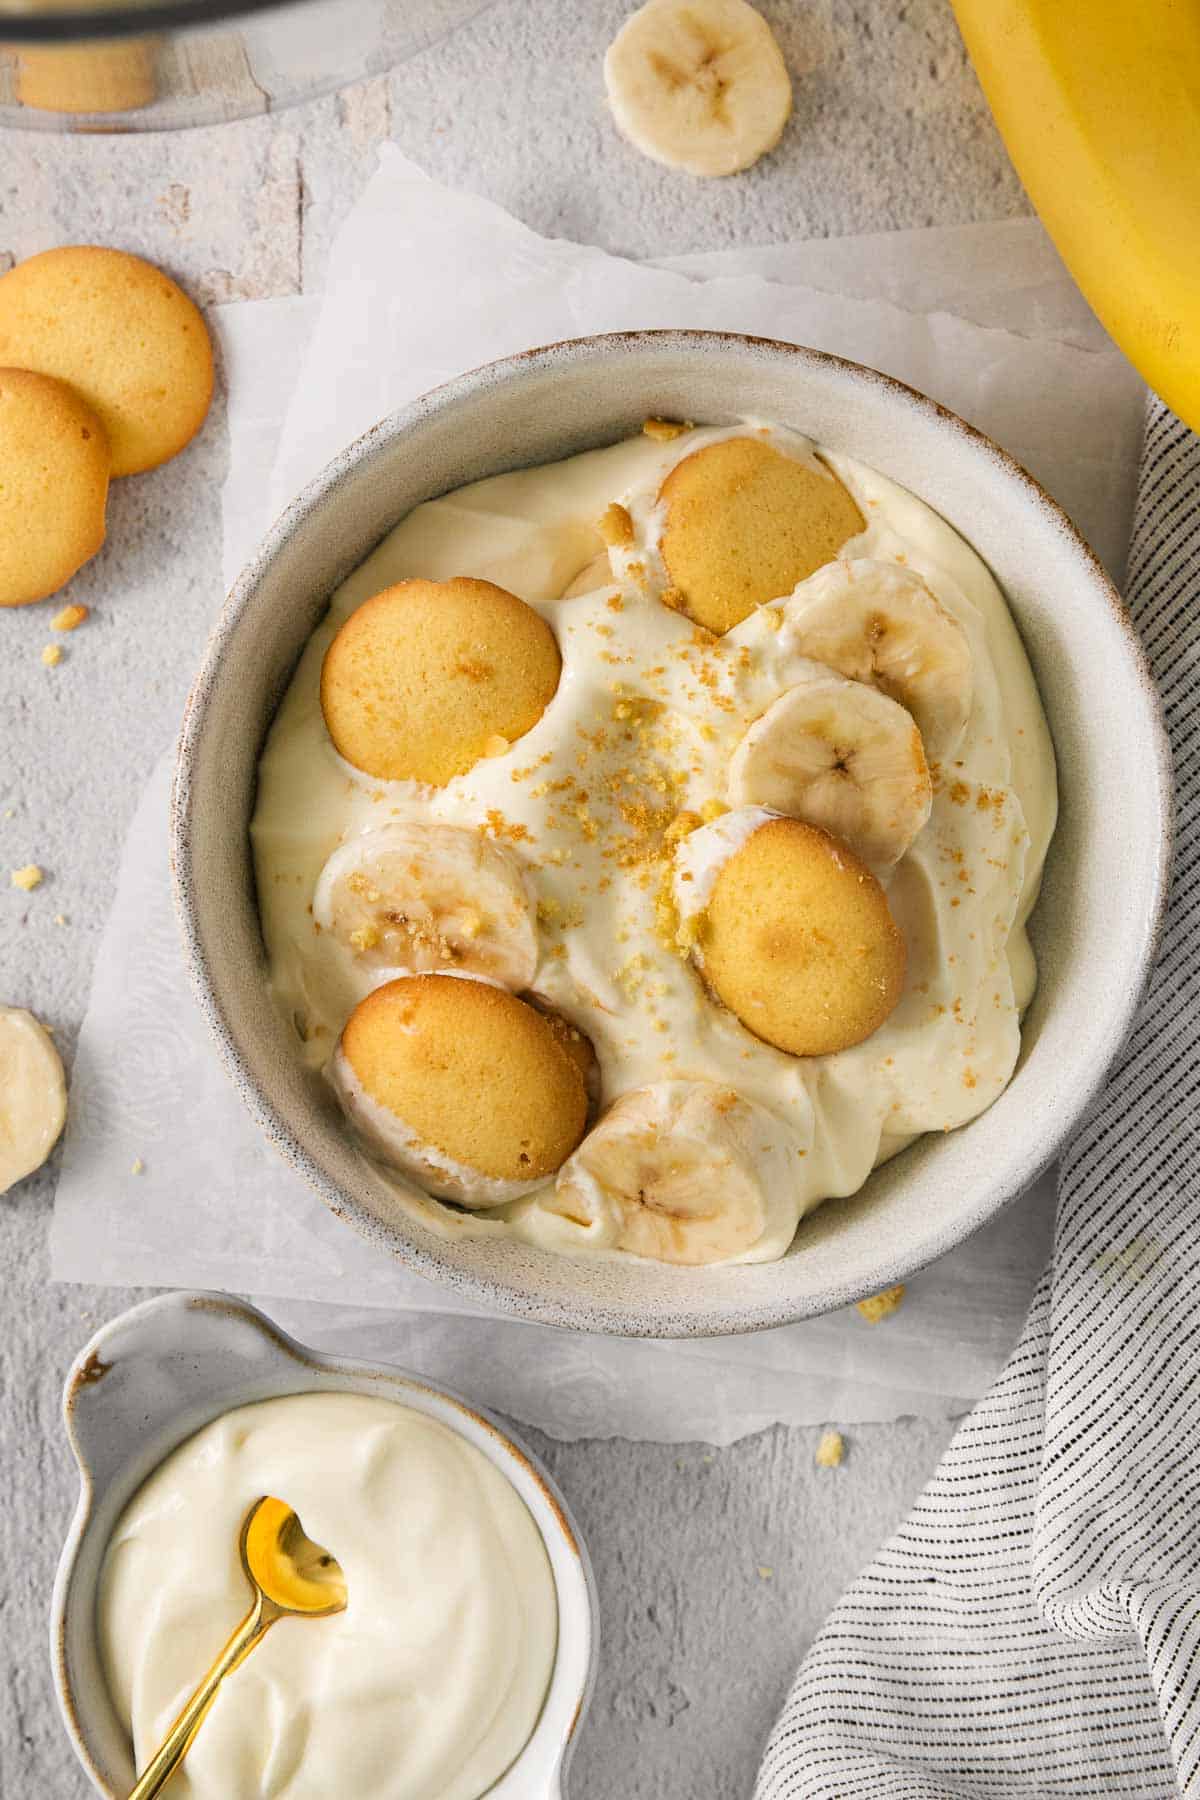 Gluten-free banana pudding in a serving dish with spoon